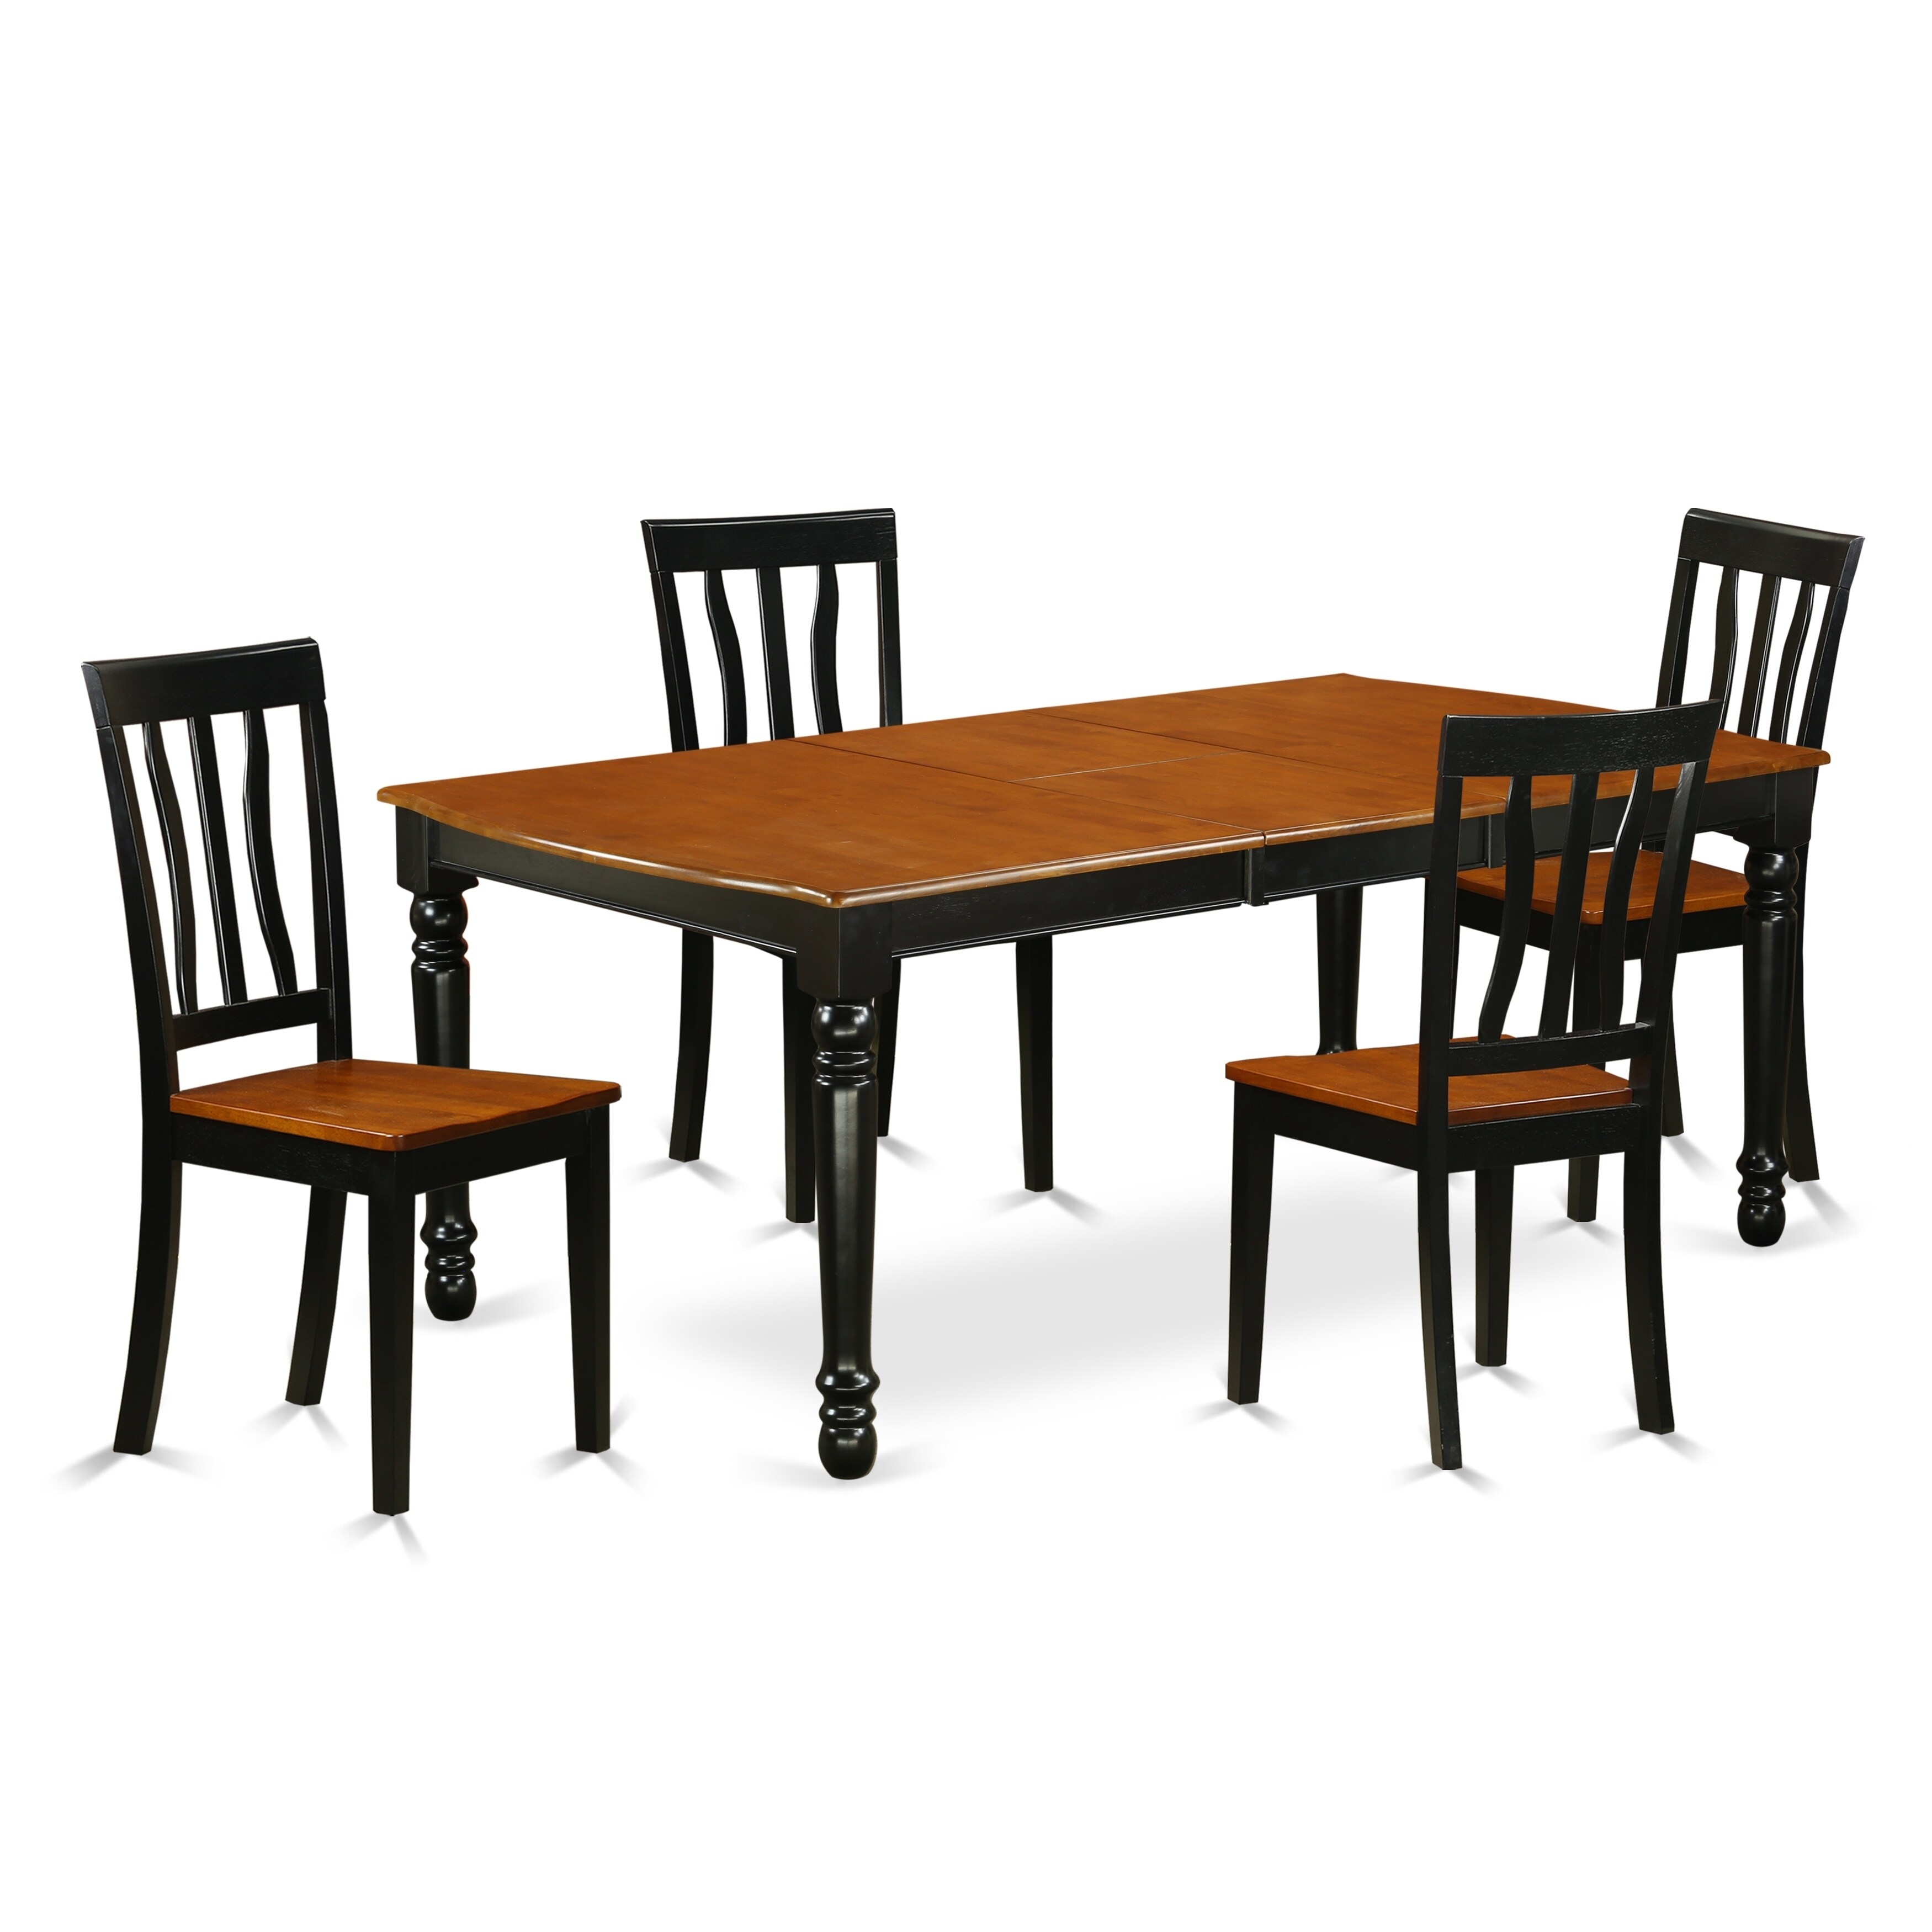 Shop DOAN5 BCH W 5 PC Kitchen Tables And Chair Set With One Dover